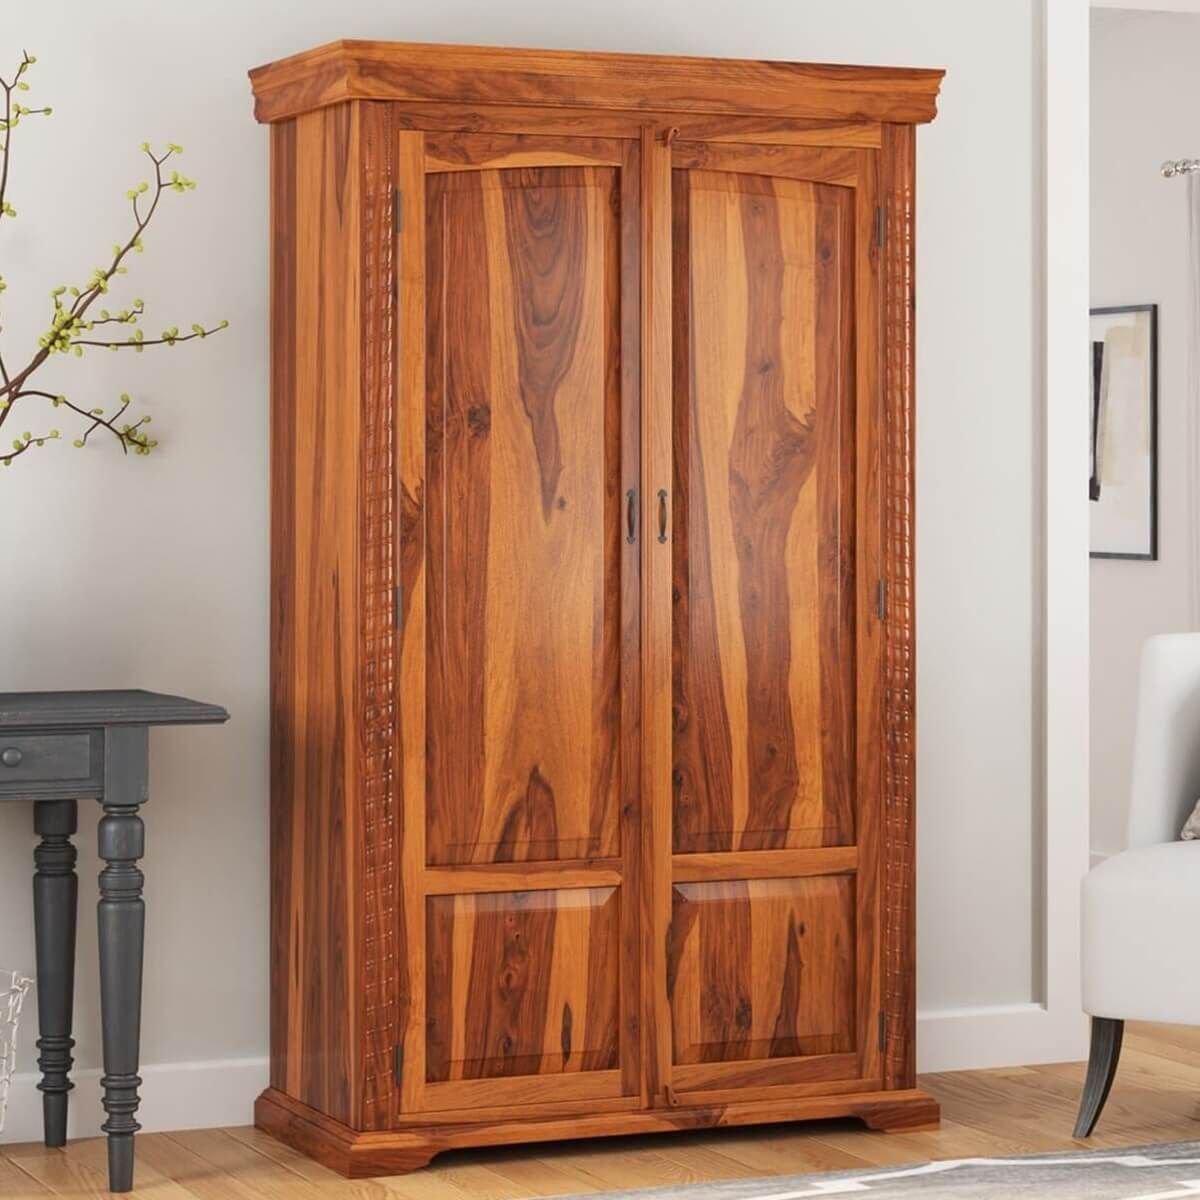 Empire Bedroom Transitional Solid Wood Large Armoire Wardrobe With Shelves Throughout Solid Wood Wardrobe Closets (View 6 of 15)